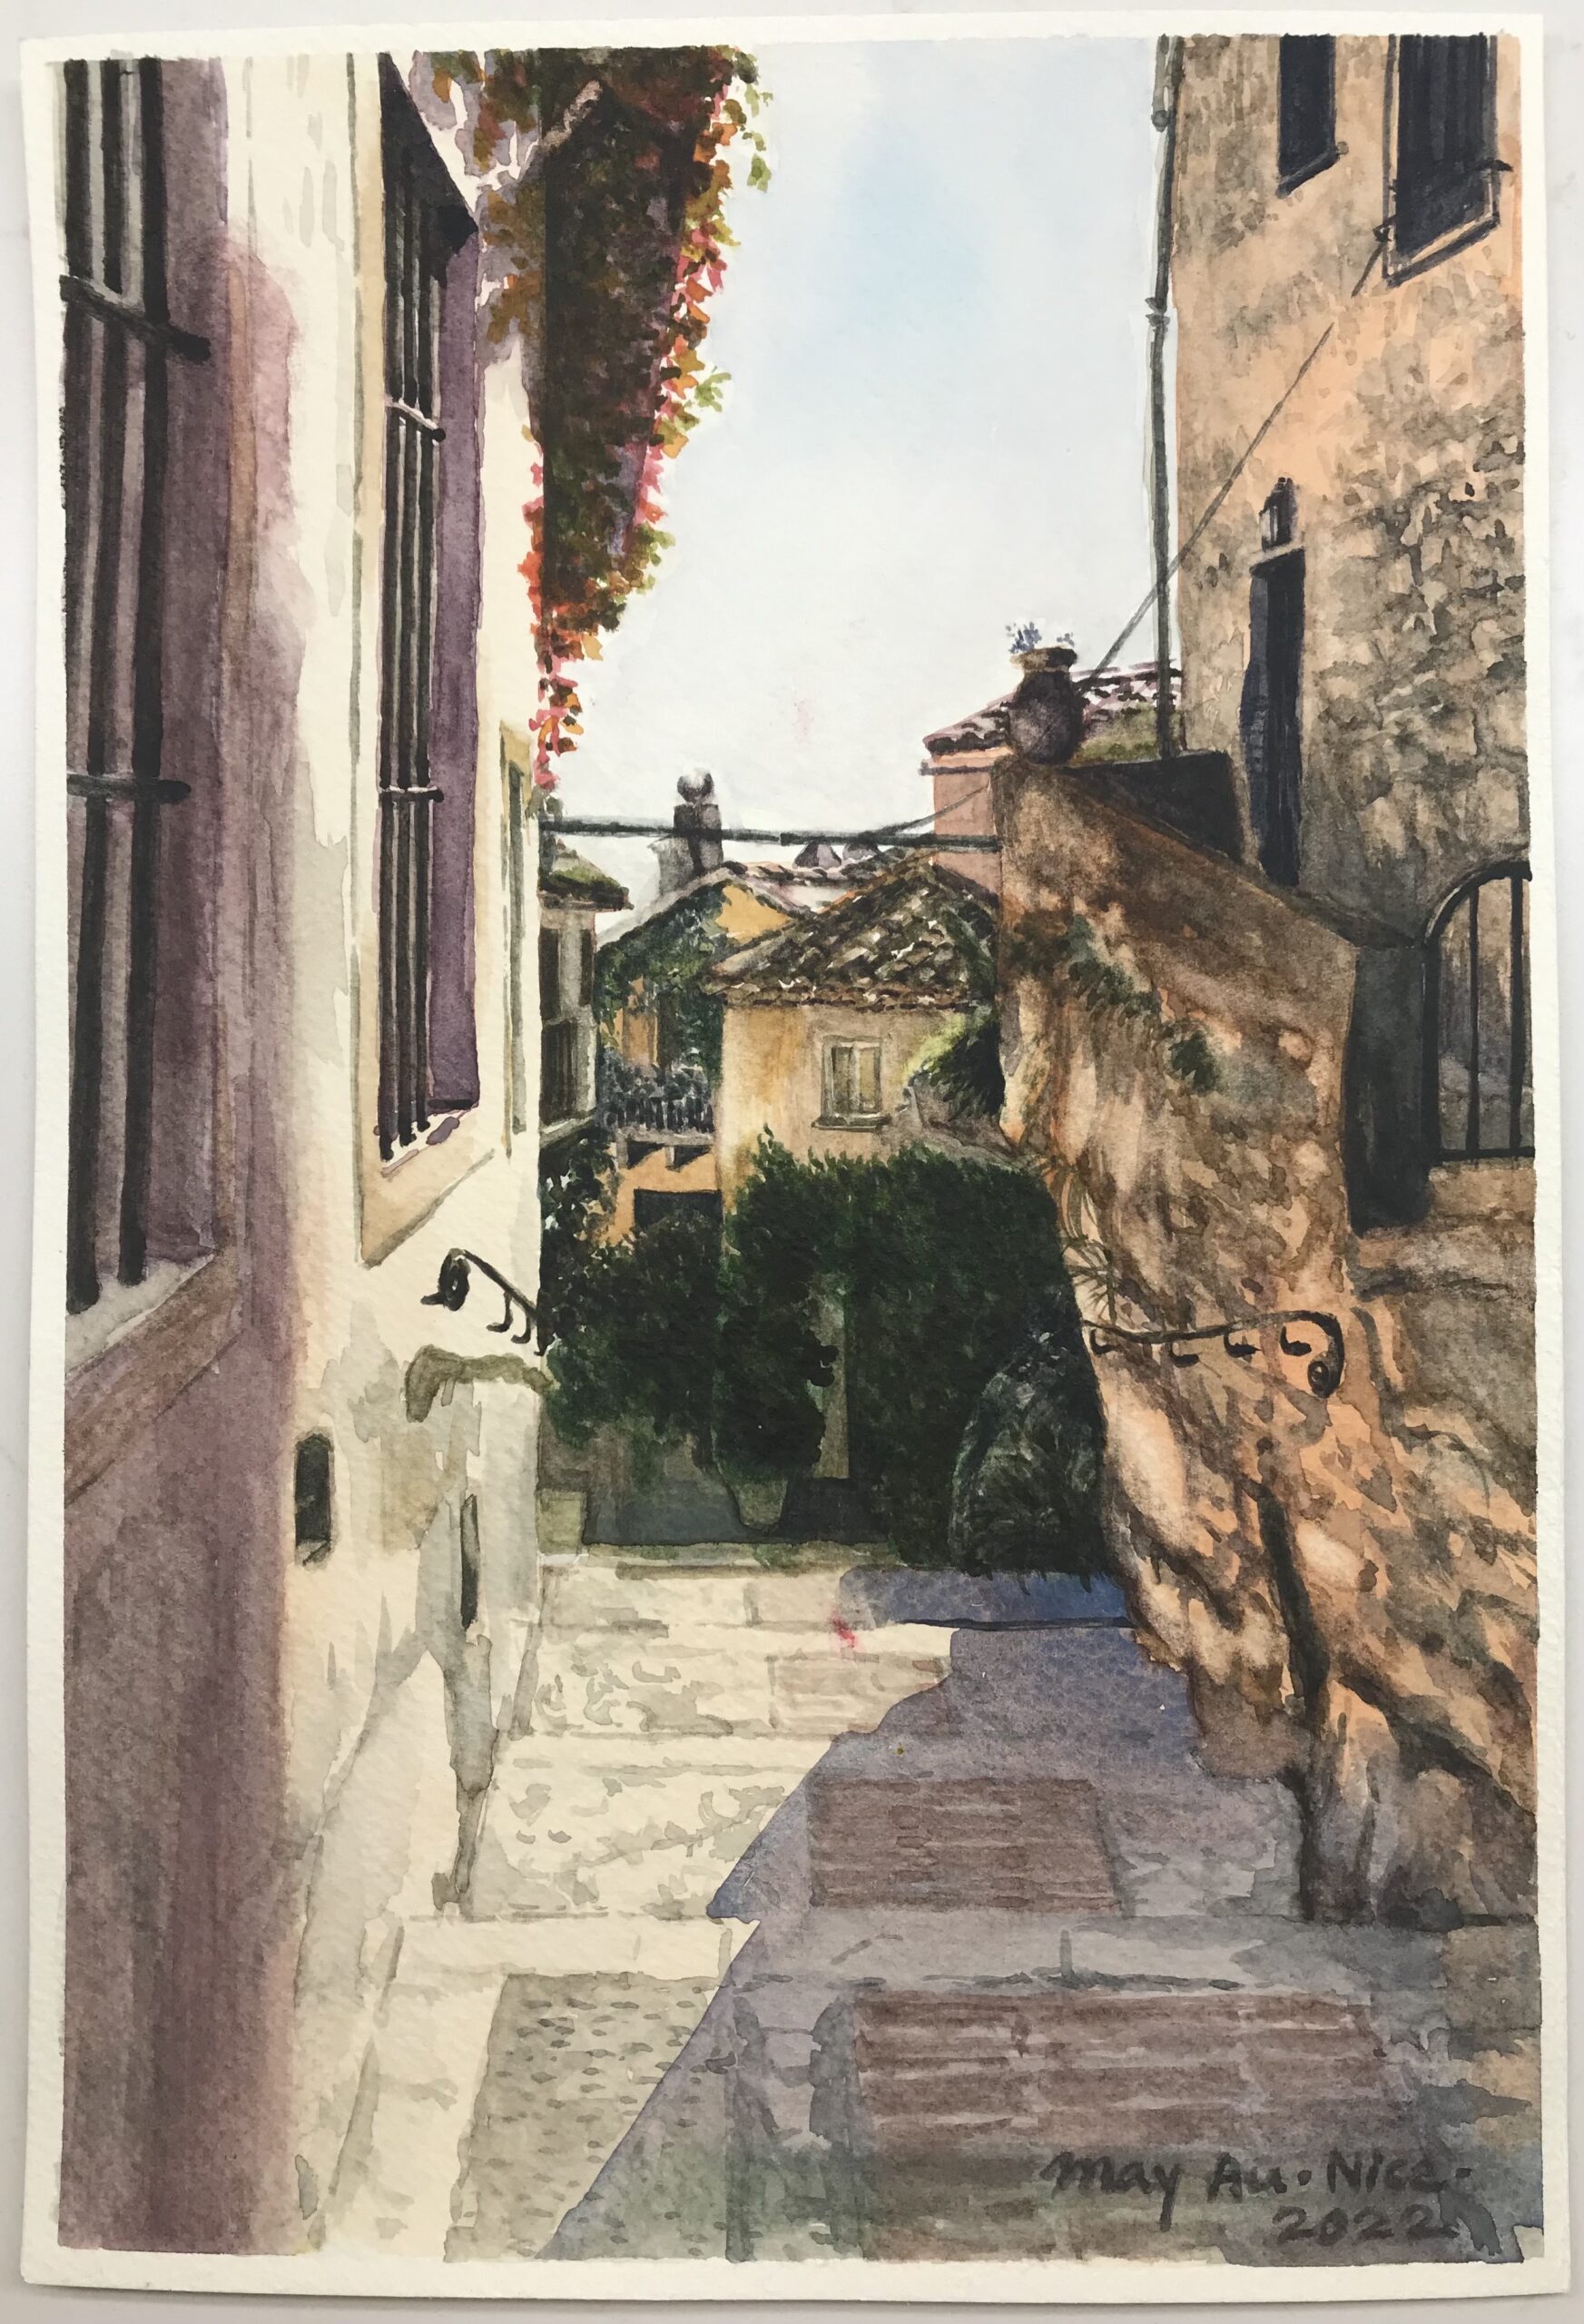 May Au's watercolor of an alley in Nice, France.